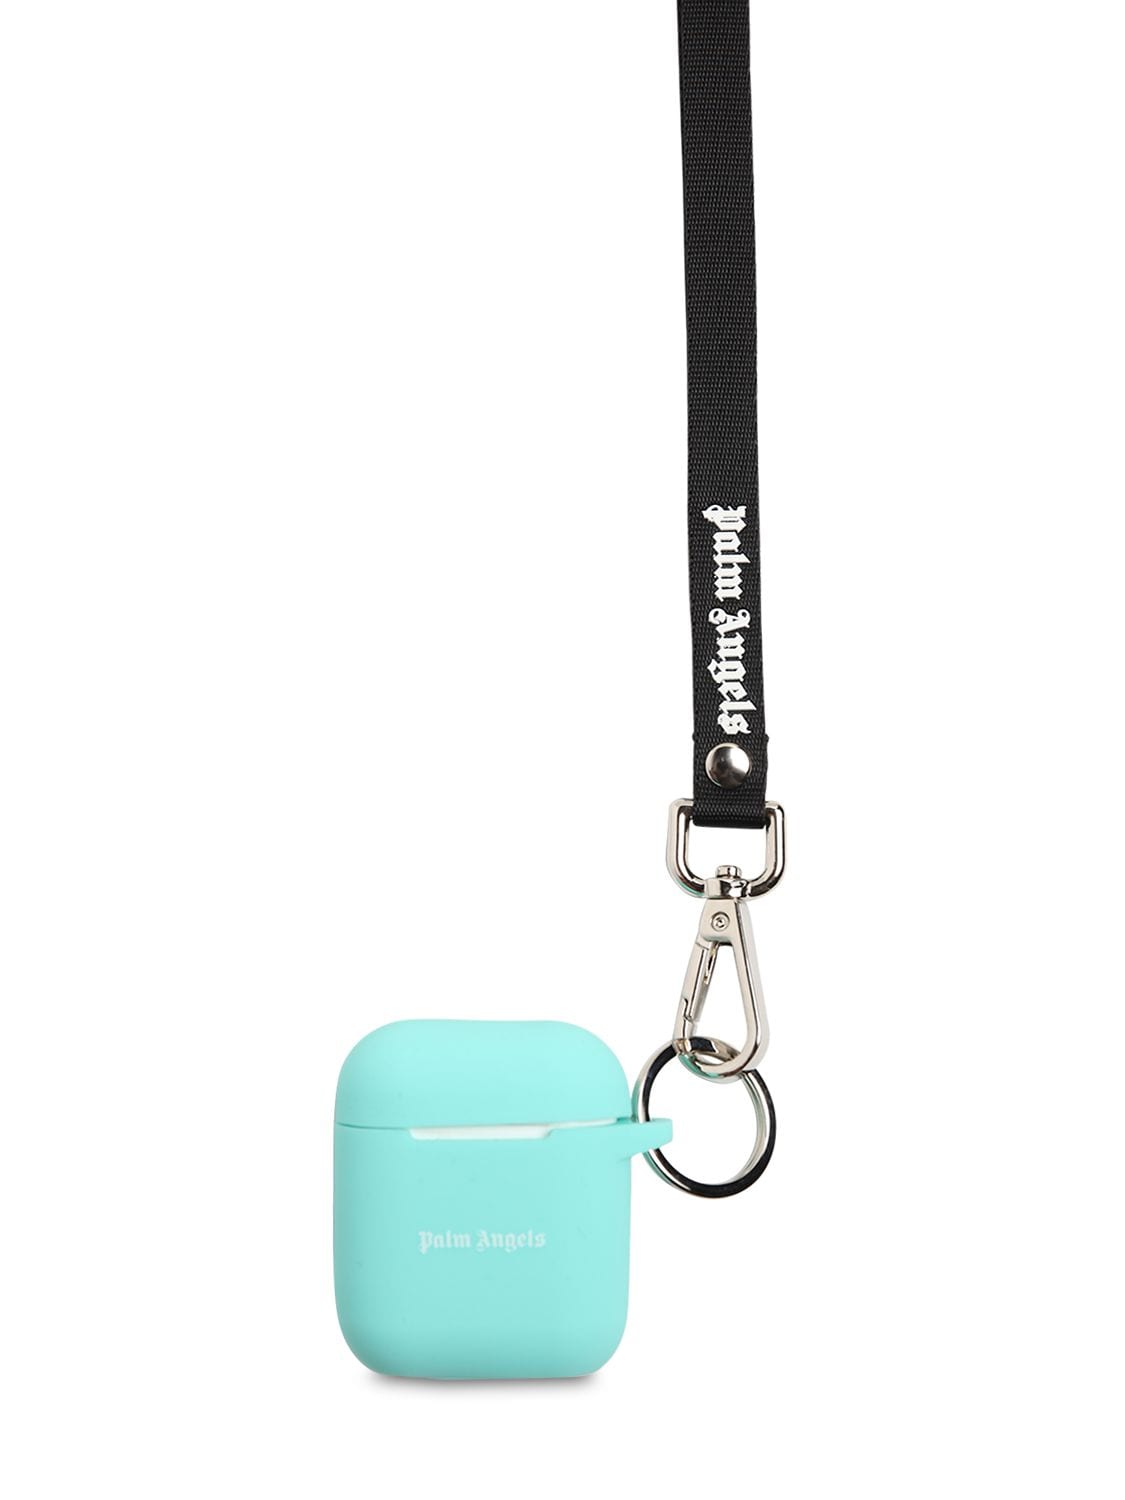 Palm Angels Logo Airpods Case In Light Blue